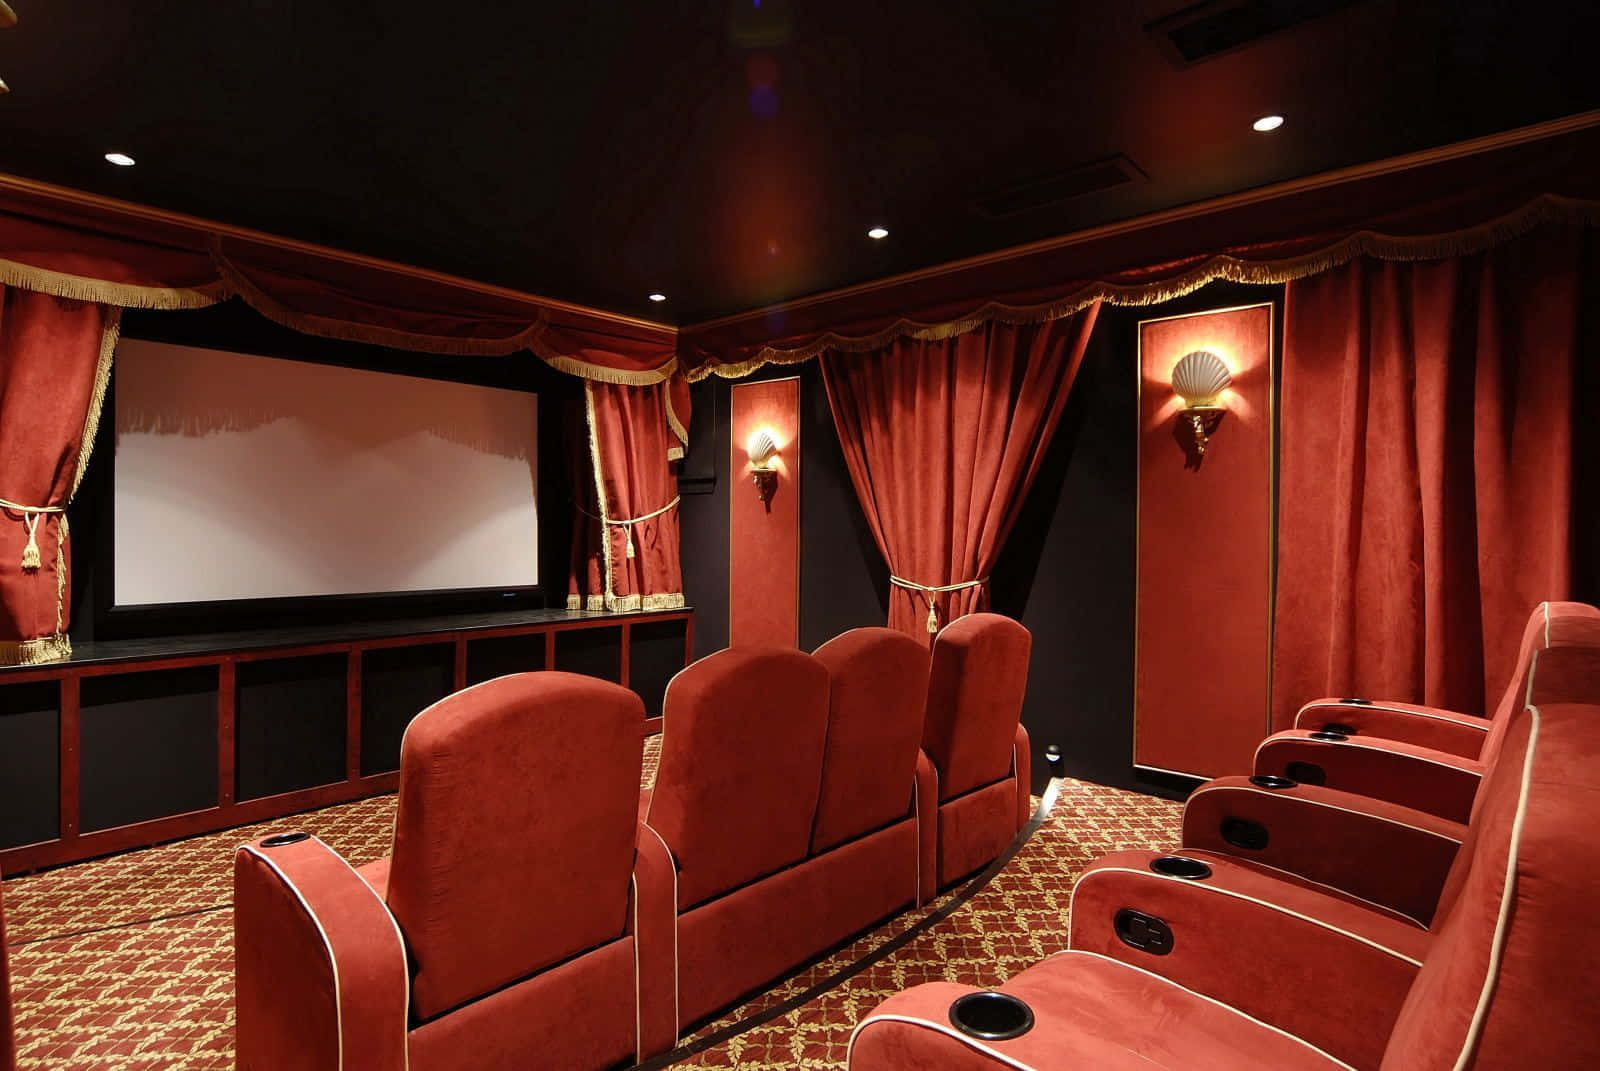 A Home Theater With Red Curtains And Red Seats